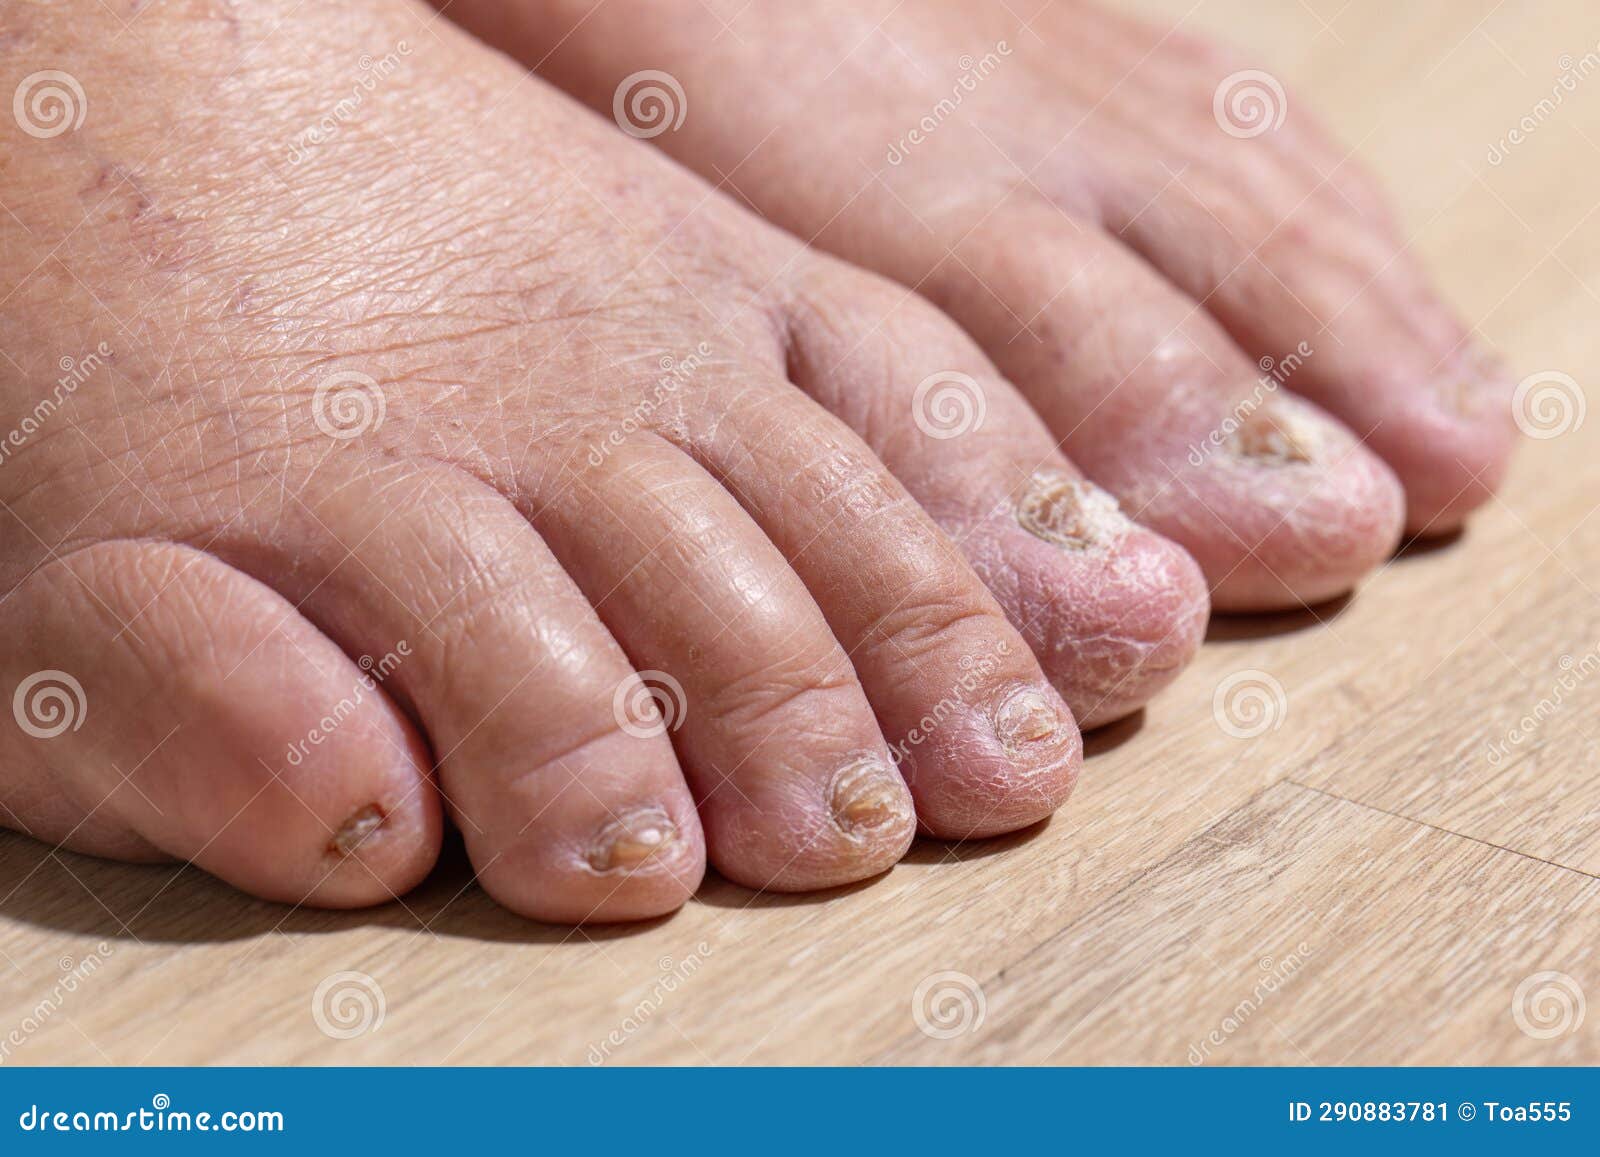 cancer chemotherapy cause swelling of ankles (ankle oedema) , . skin to become dry, peel and nails brittle or flaky